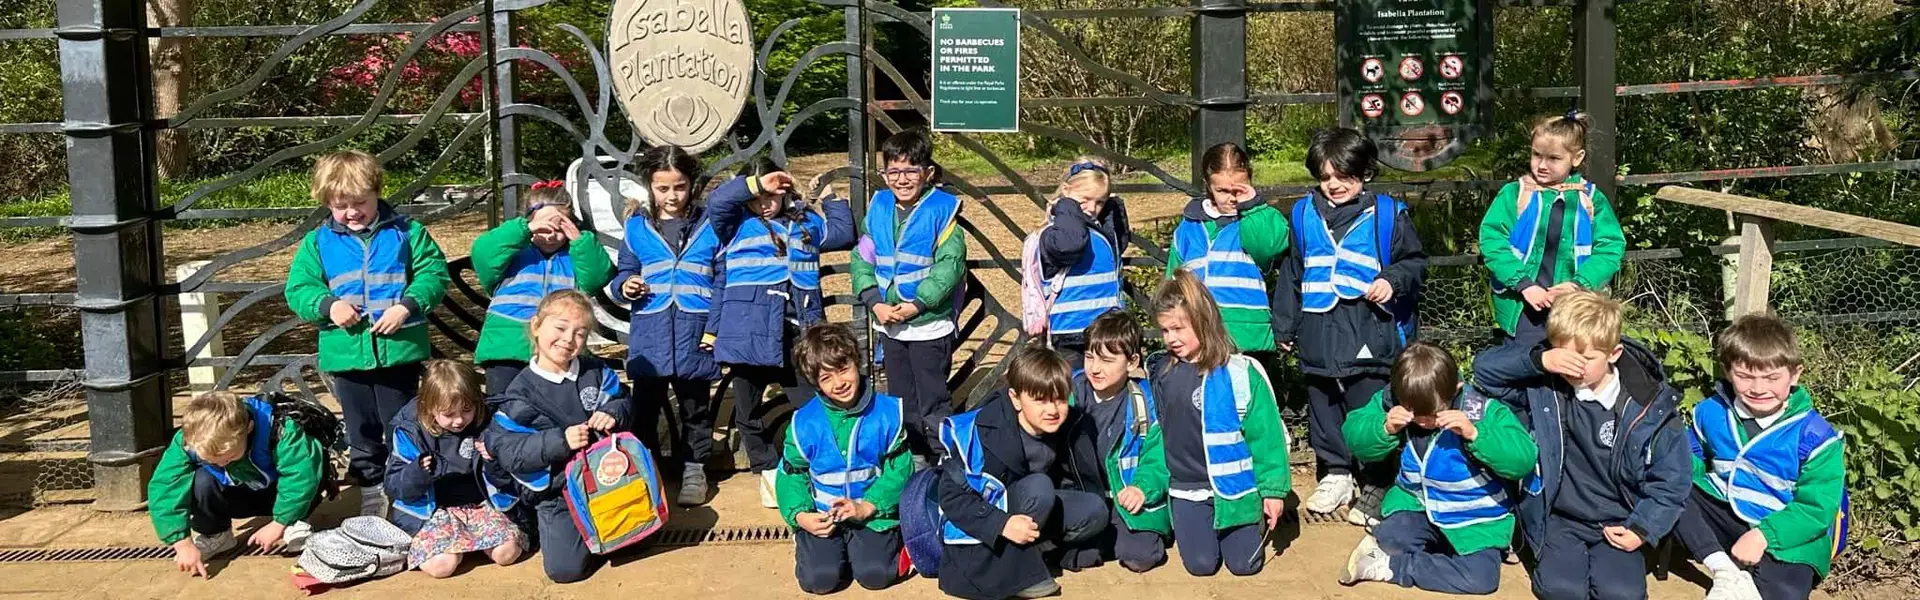 Kindergarten pupils became explorers in the magical Isabella Plantation | Ibstock Place School, a private school near Richmond, Barnes, Putney, Kingston, and Wandsworth.